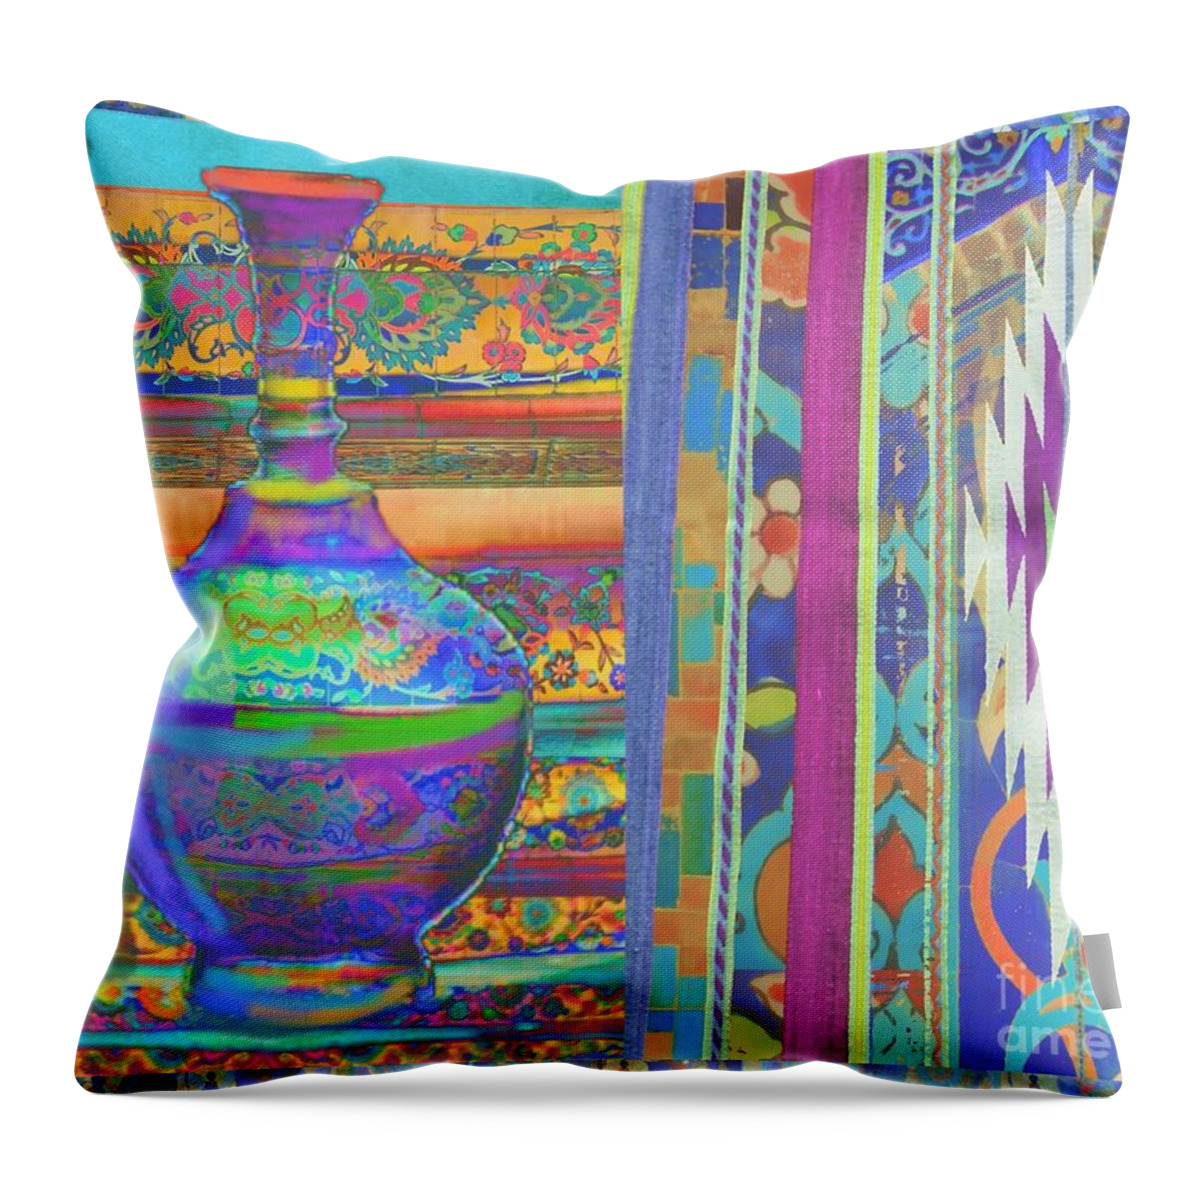 Mixed Media Throw Pillow featuring the mixed media Blue urn by Seema Z